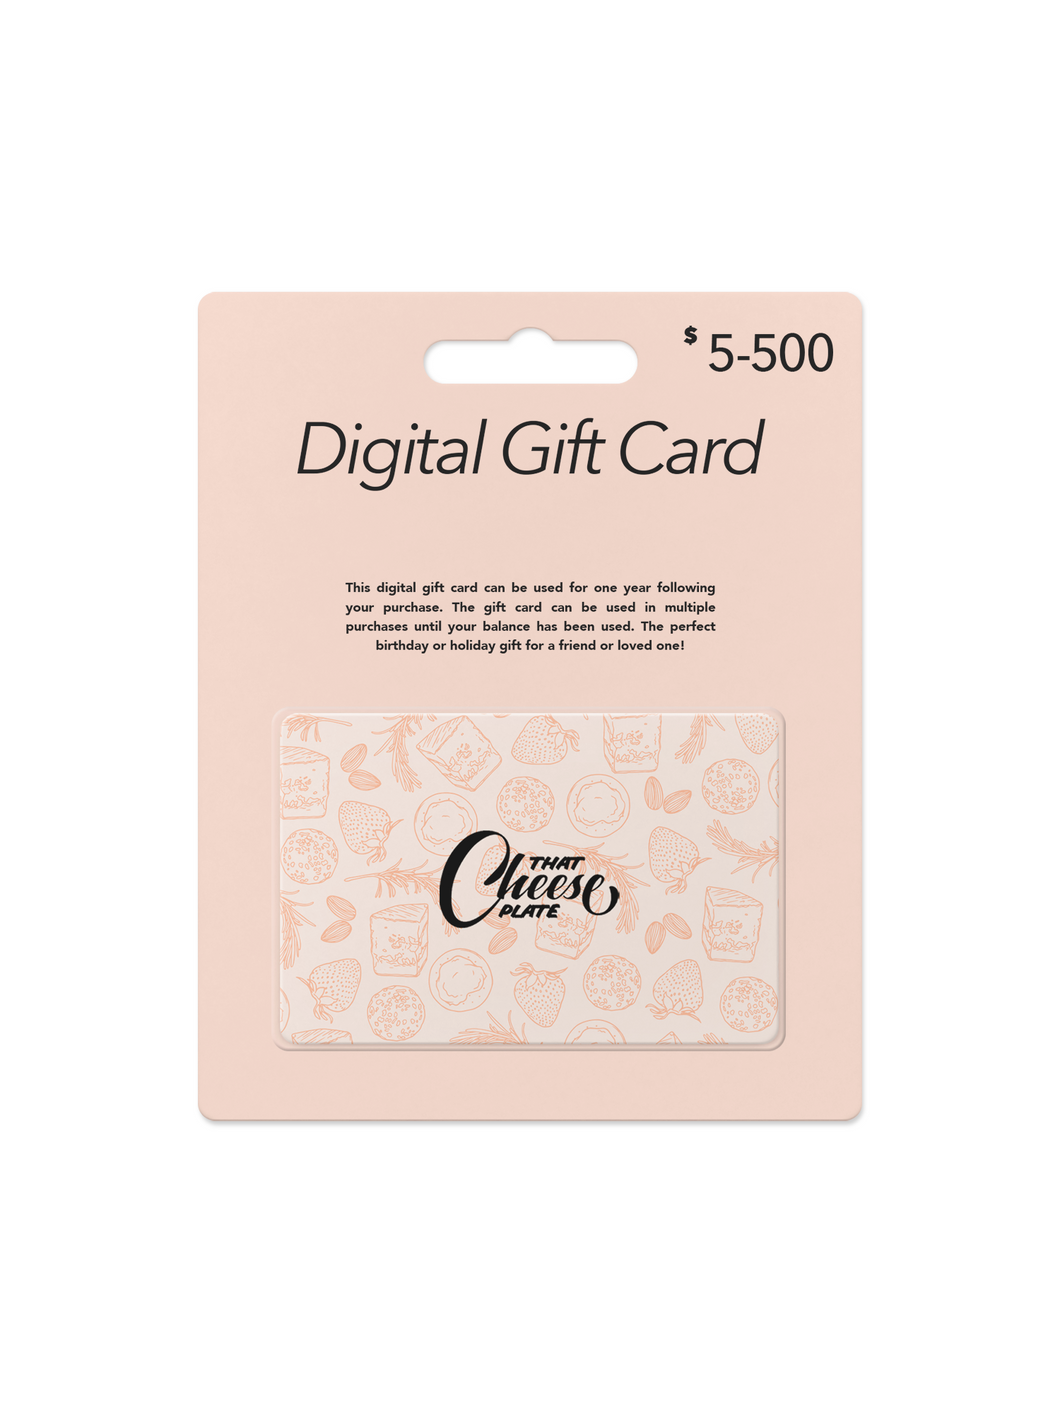 That Gift Card